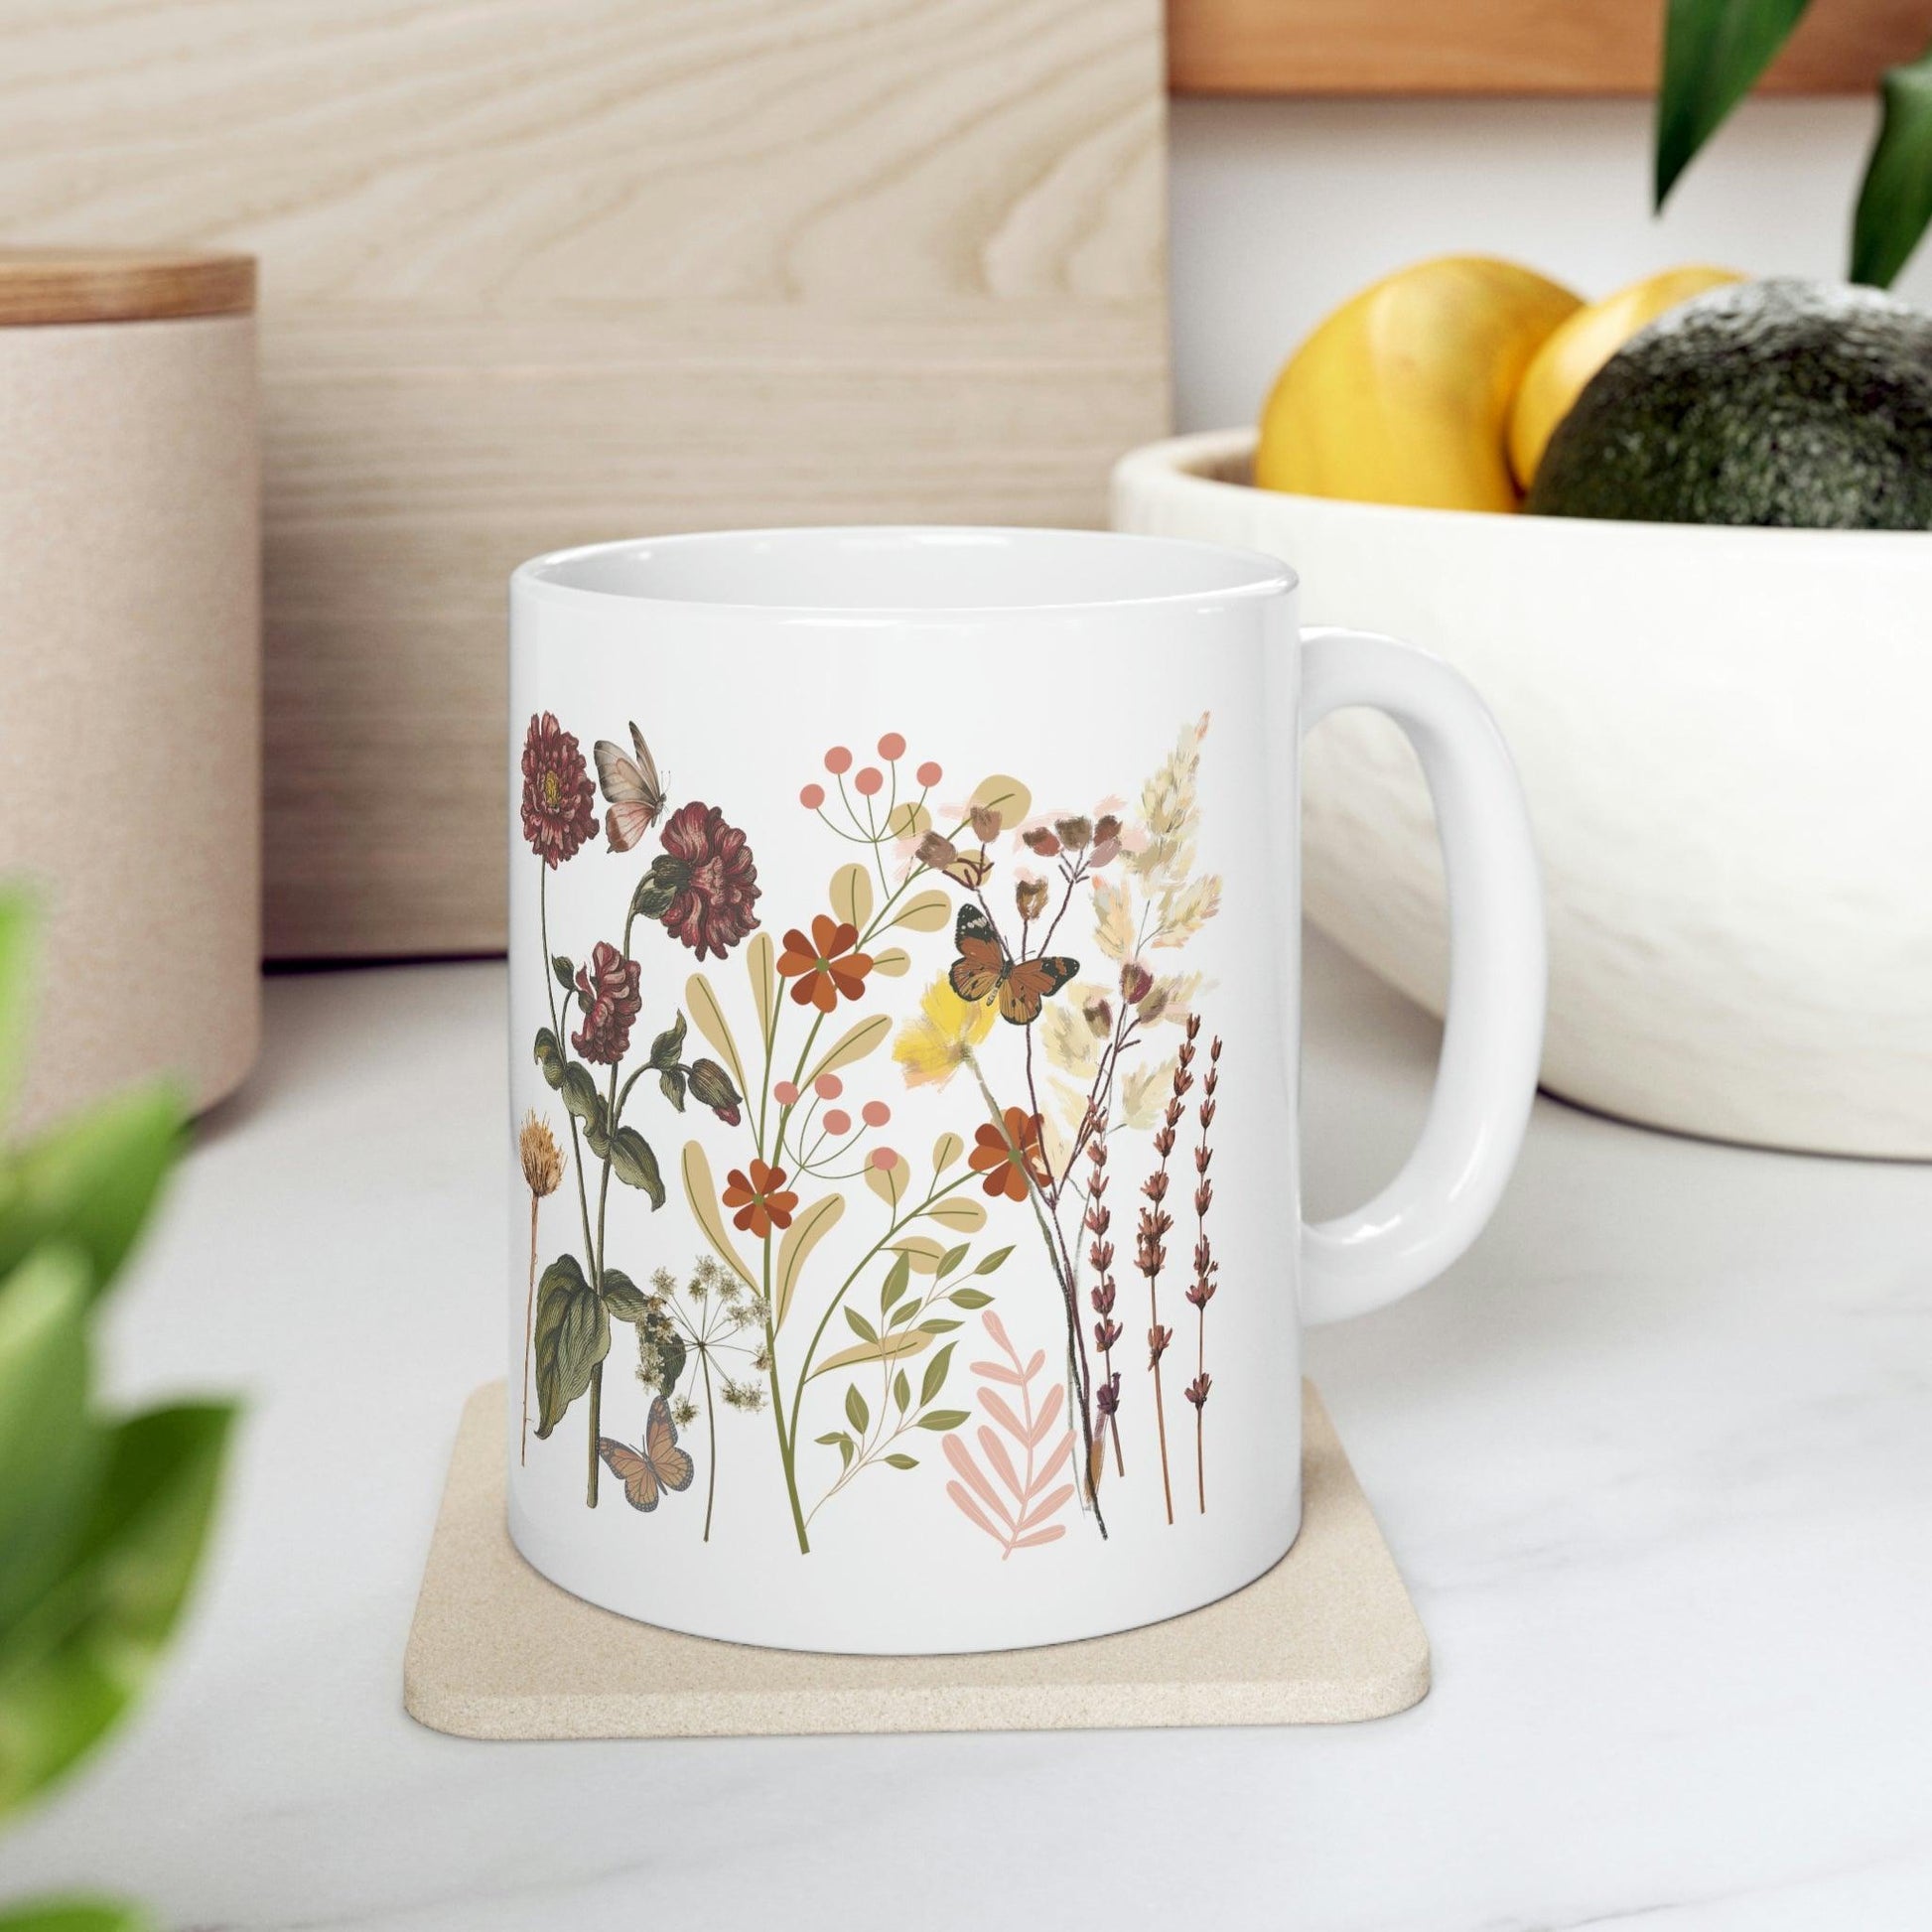 Floral Mug, gift for mom on mothers day, Birthday gift for mom, gift for plant lovers, coffee mug for her, hot cocoa mug, gift for coffee lover - Giftsmojo